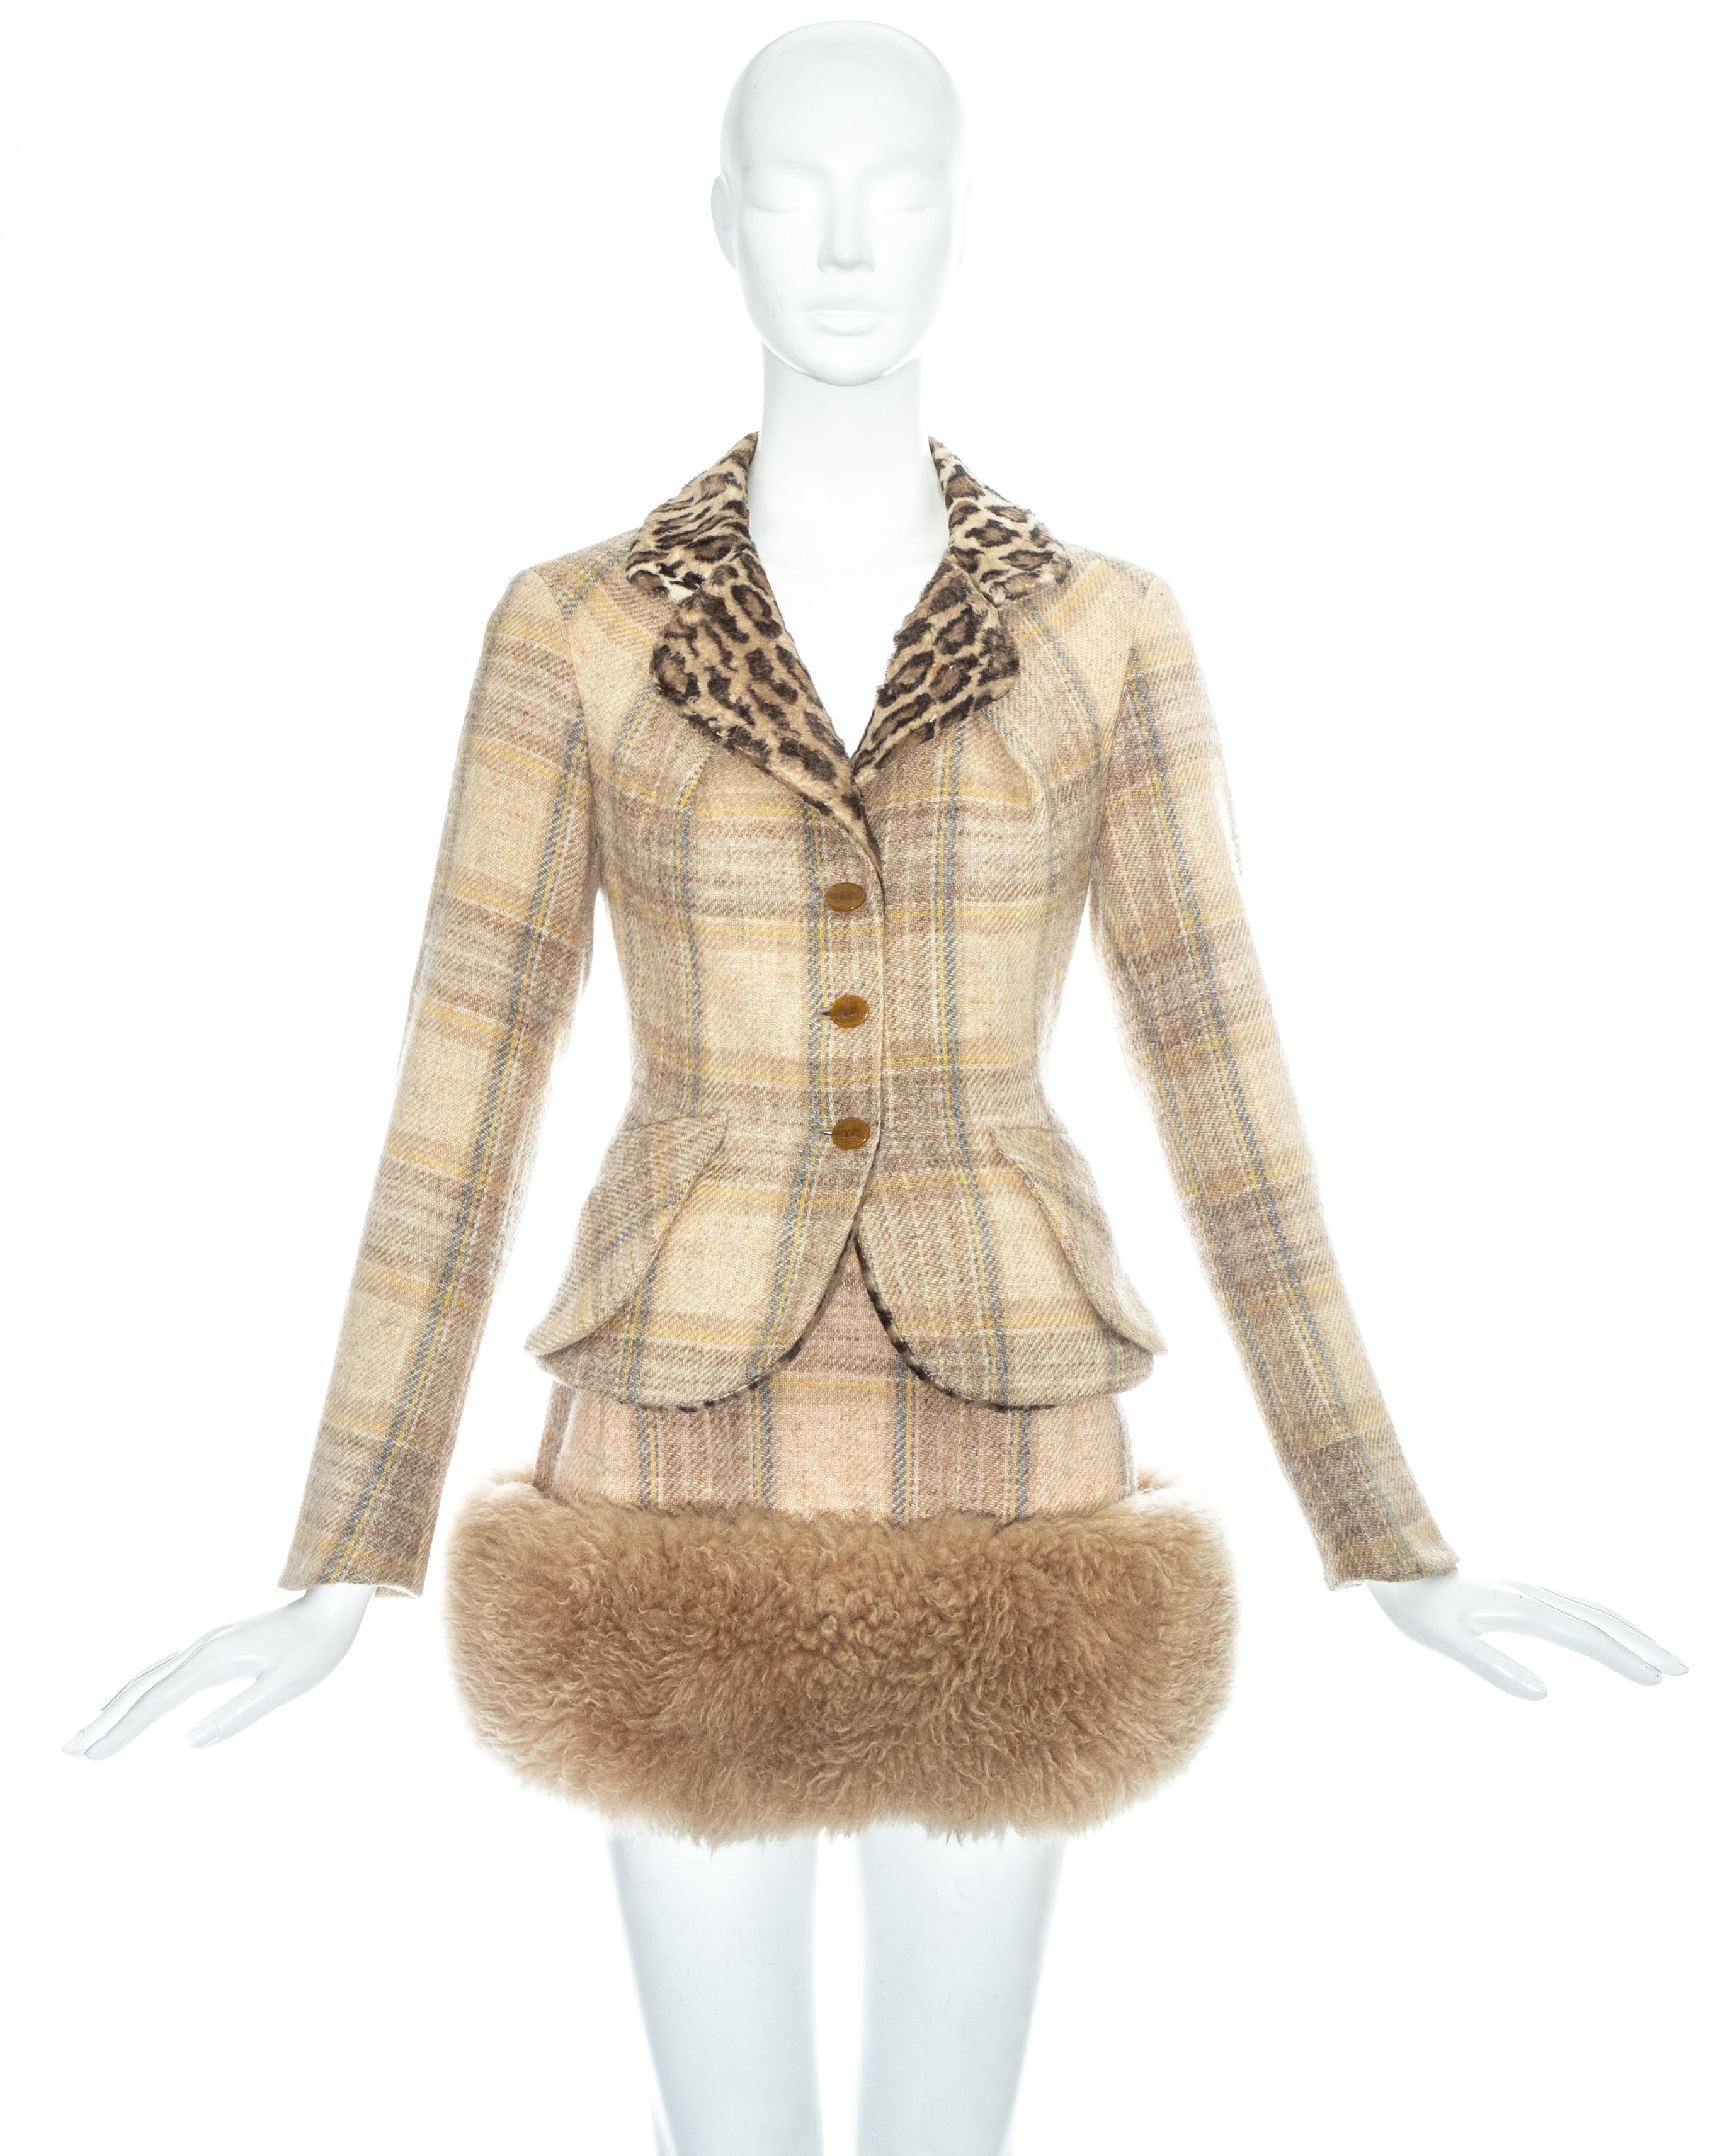 Vivienne Westwood; oatmeal tartan wool skirt suit. 

- Blazer jacket with leopard print faux fur collar, three 'Orb' button fastenings and pocket flap peplum
- Micro mini skirt with large cream shearling trim, zip and button fastening. 

Fall-Winter